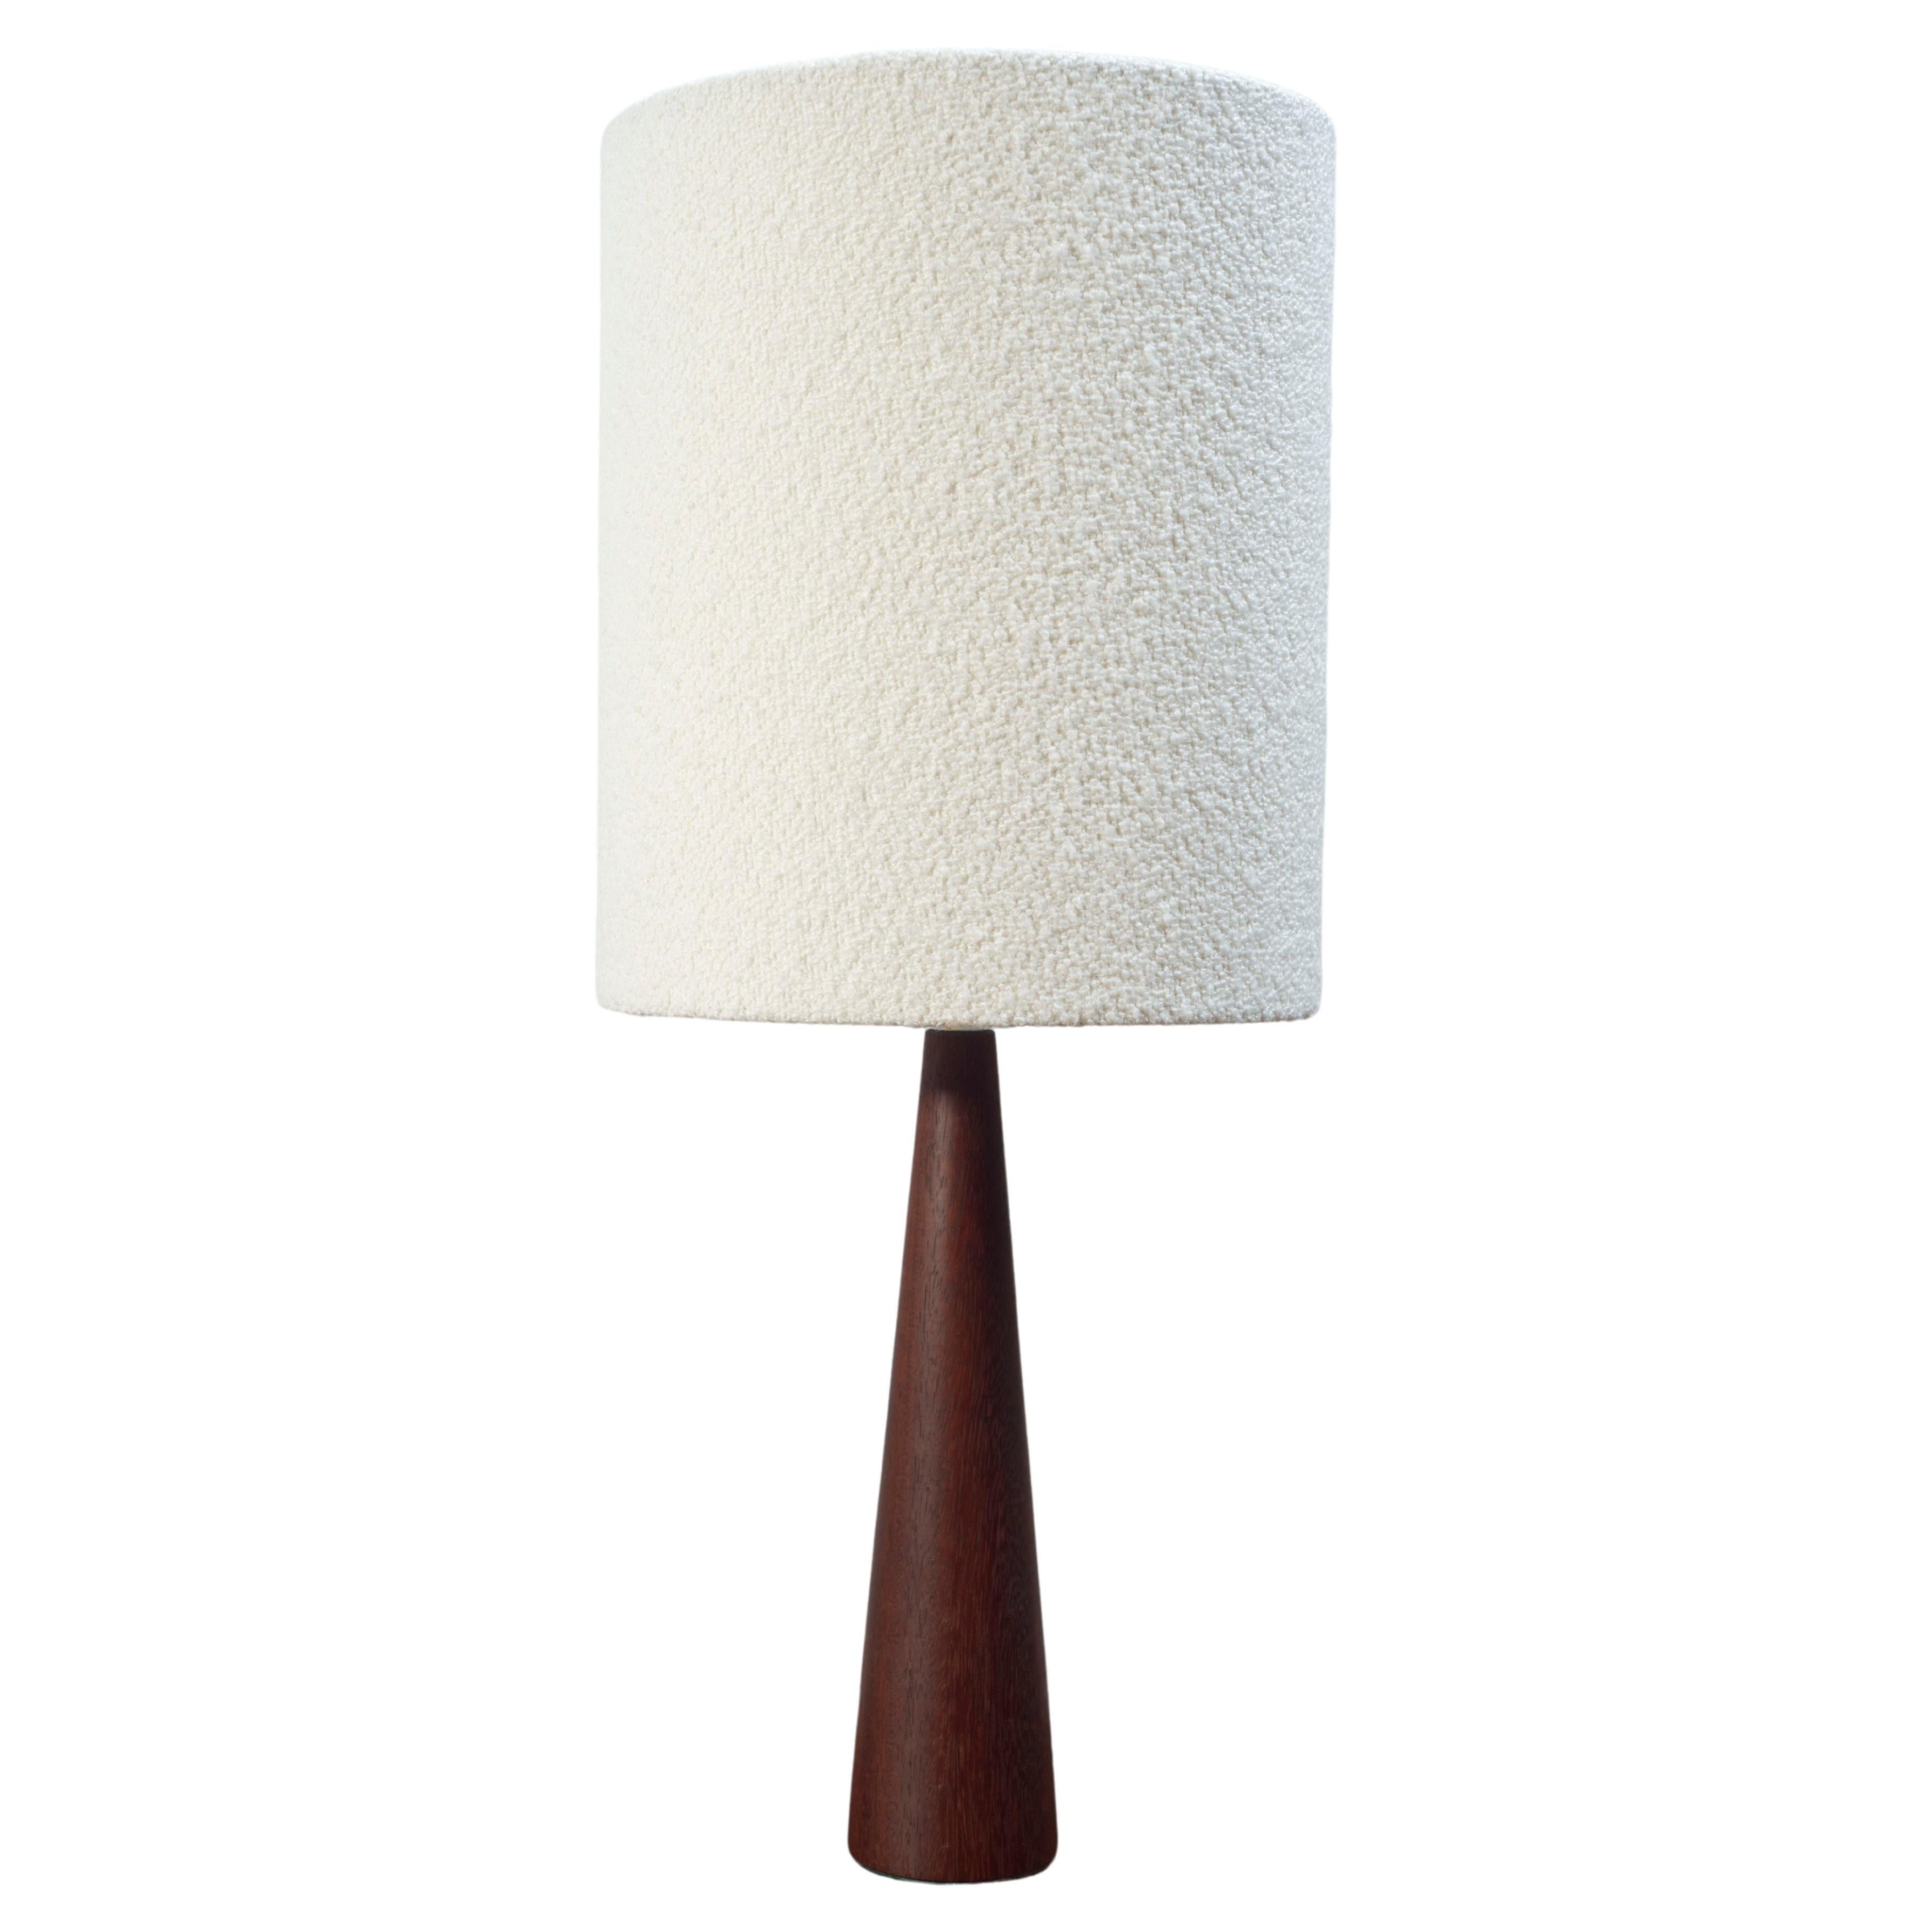 Vintage turned teak table lamp with a boucle lampshade